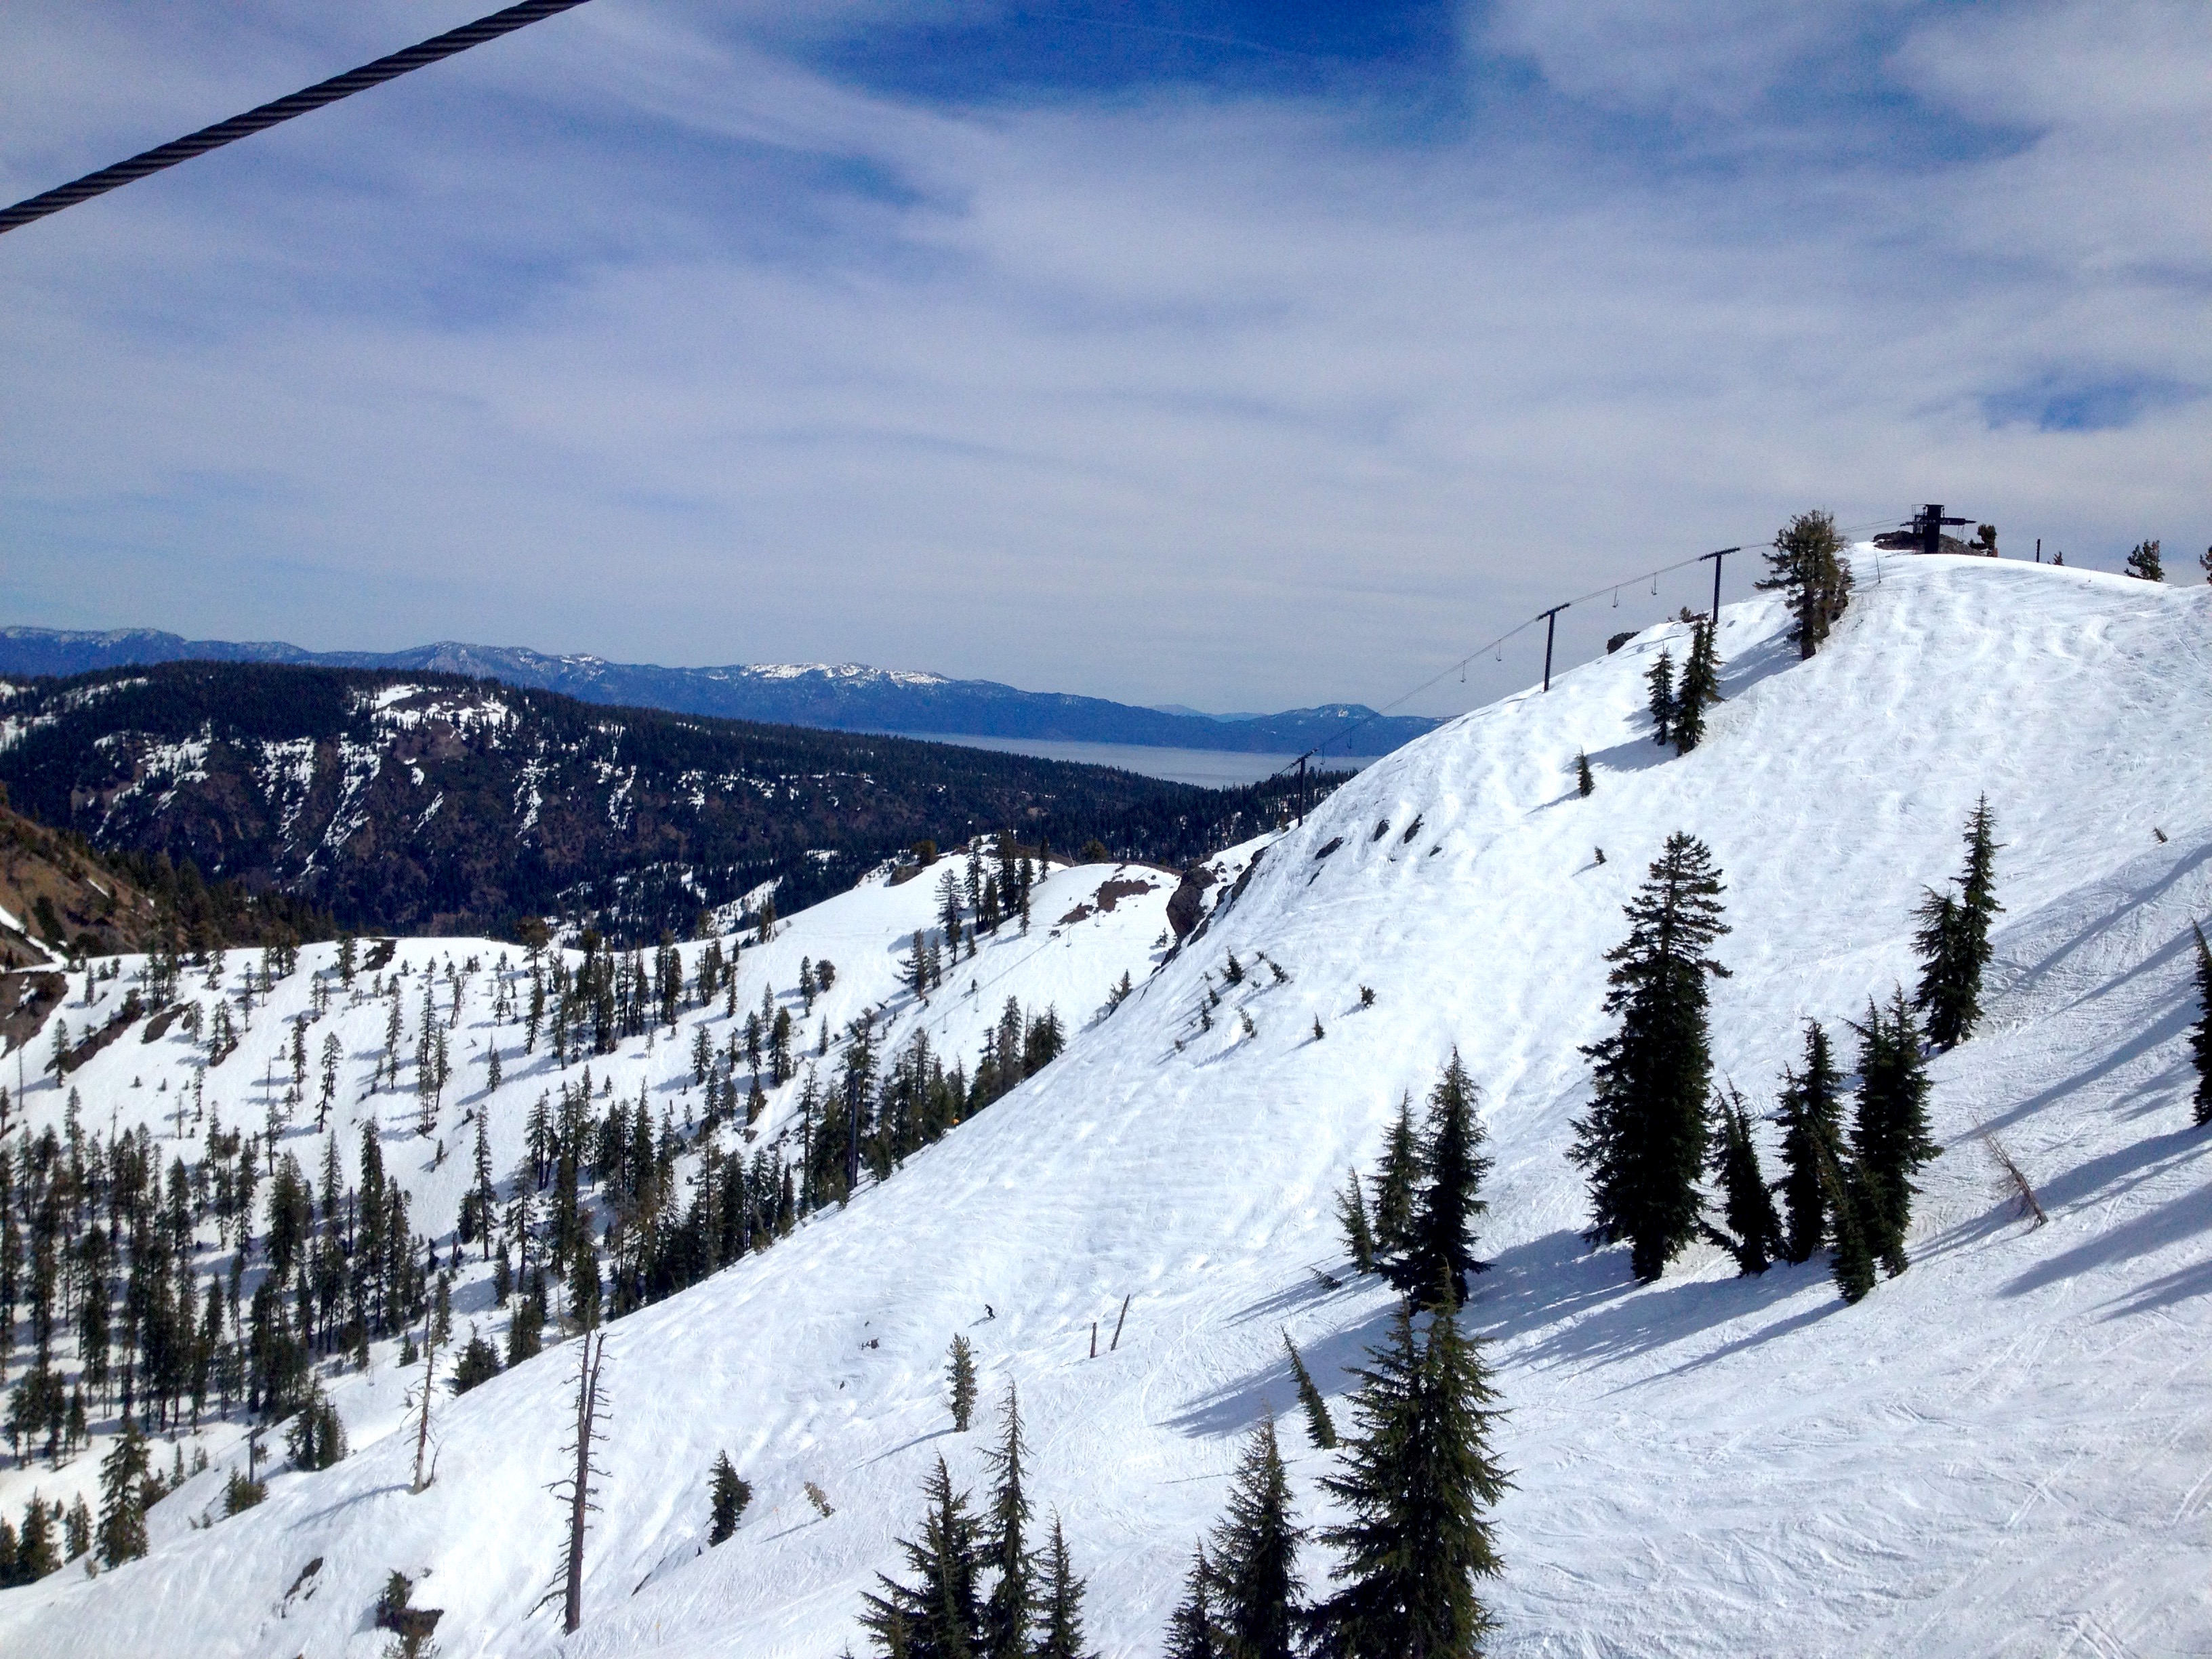 Olympic Lady and Lake Tahoe today. photo; snowbrains